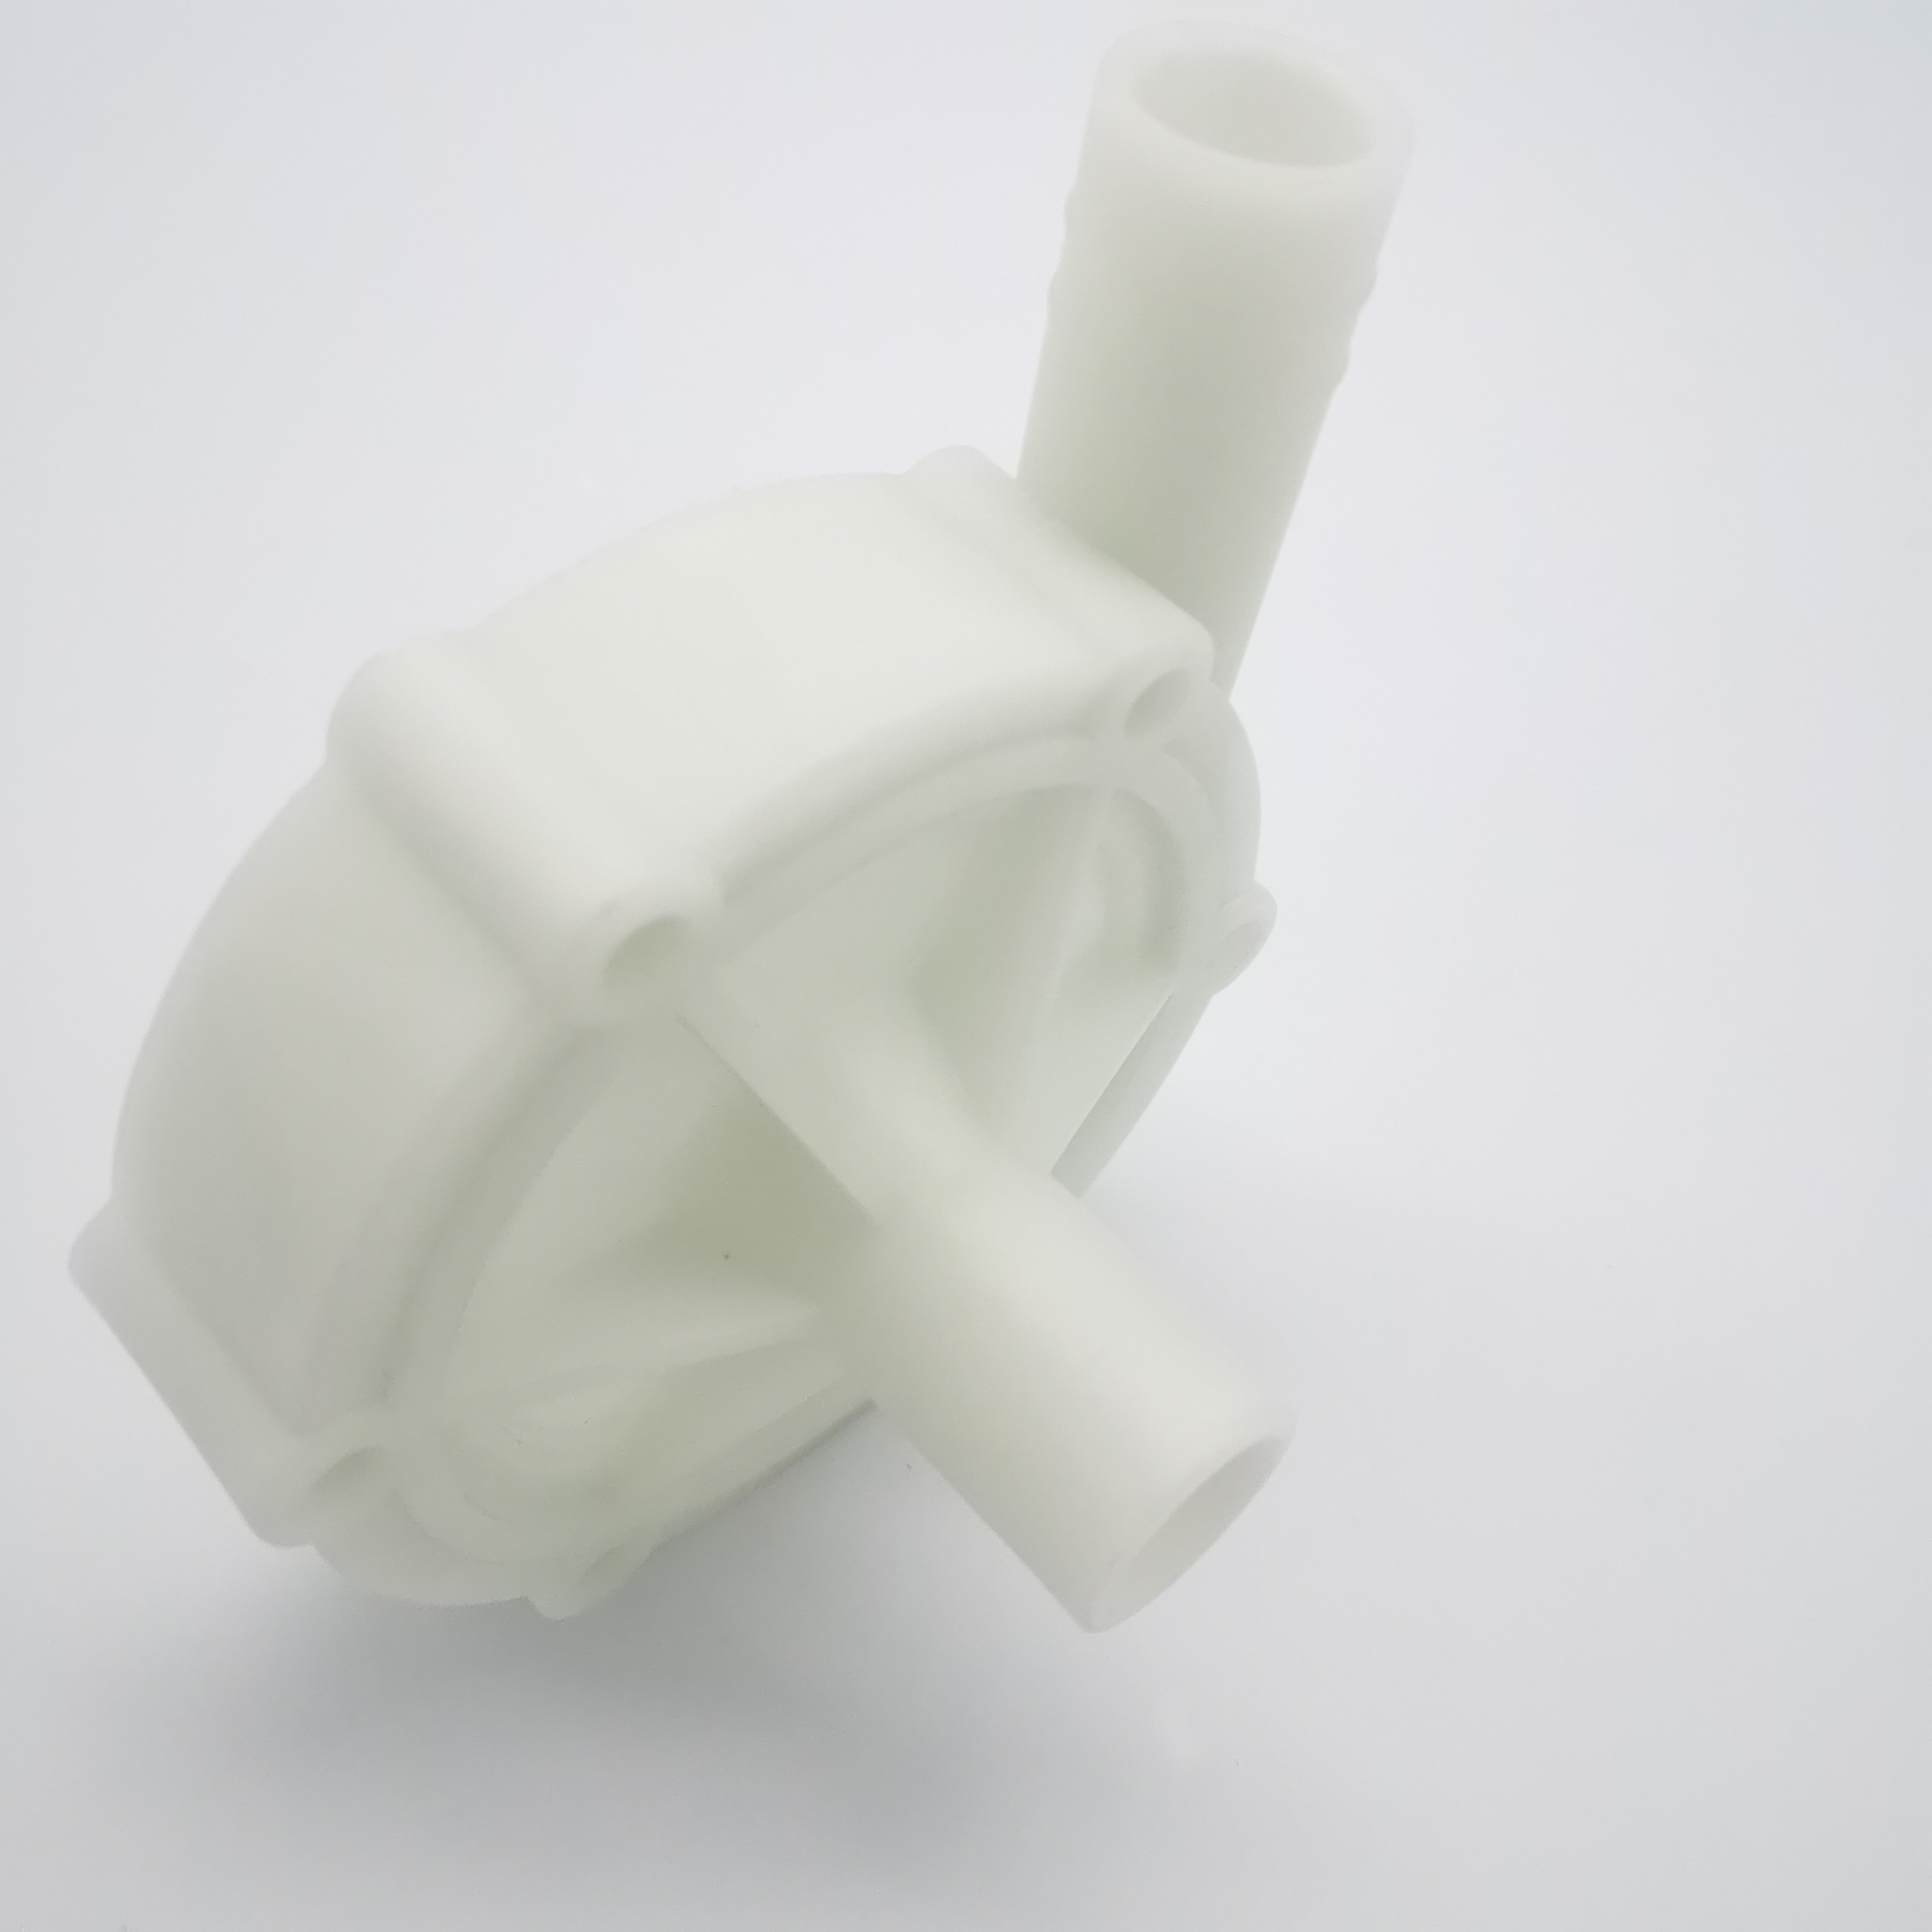 Pump Shell Of Plastic Pump Head for MP20RM/20RX/15R/15RM /15RN Homebrew Beer Pump Replacement Parts Accessories